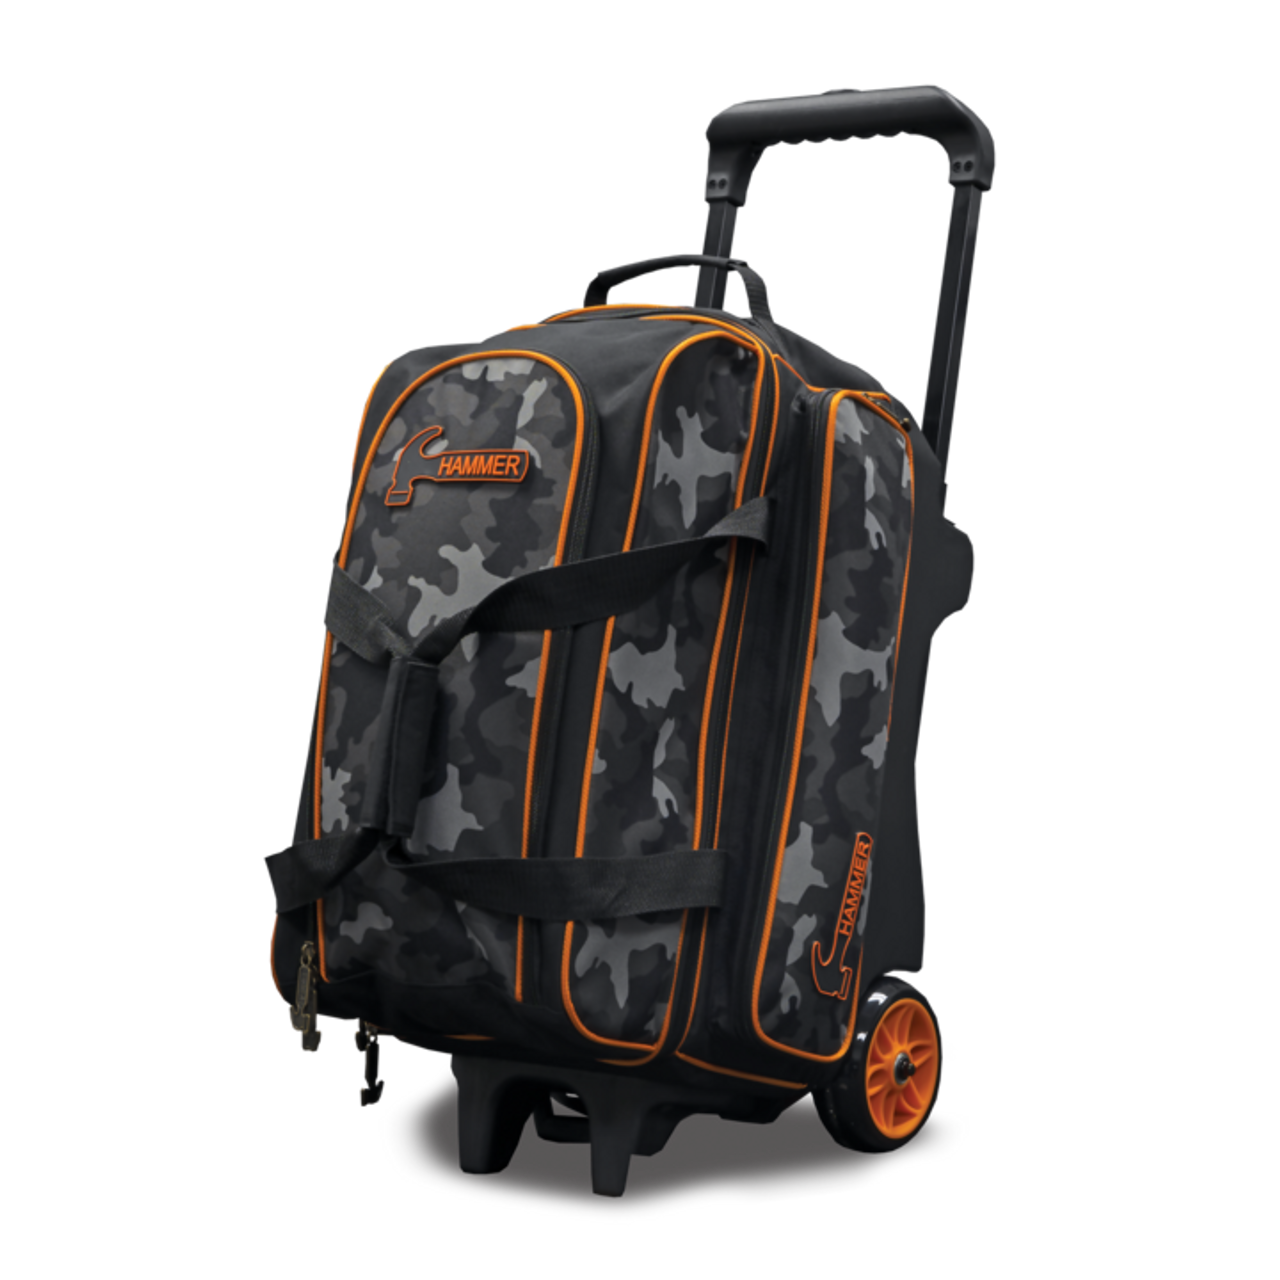 900 Global Deluxe 3 Ball Roller Bowling Bag- Blue/Gold